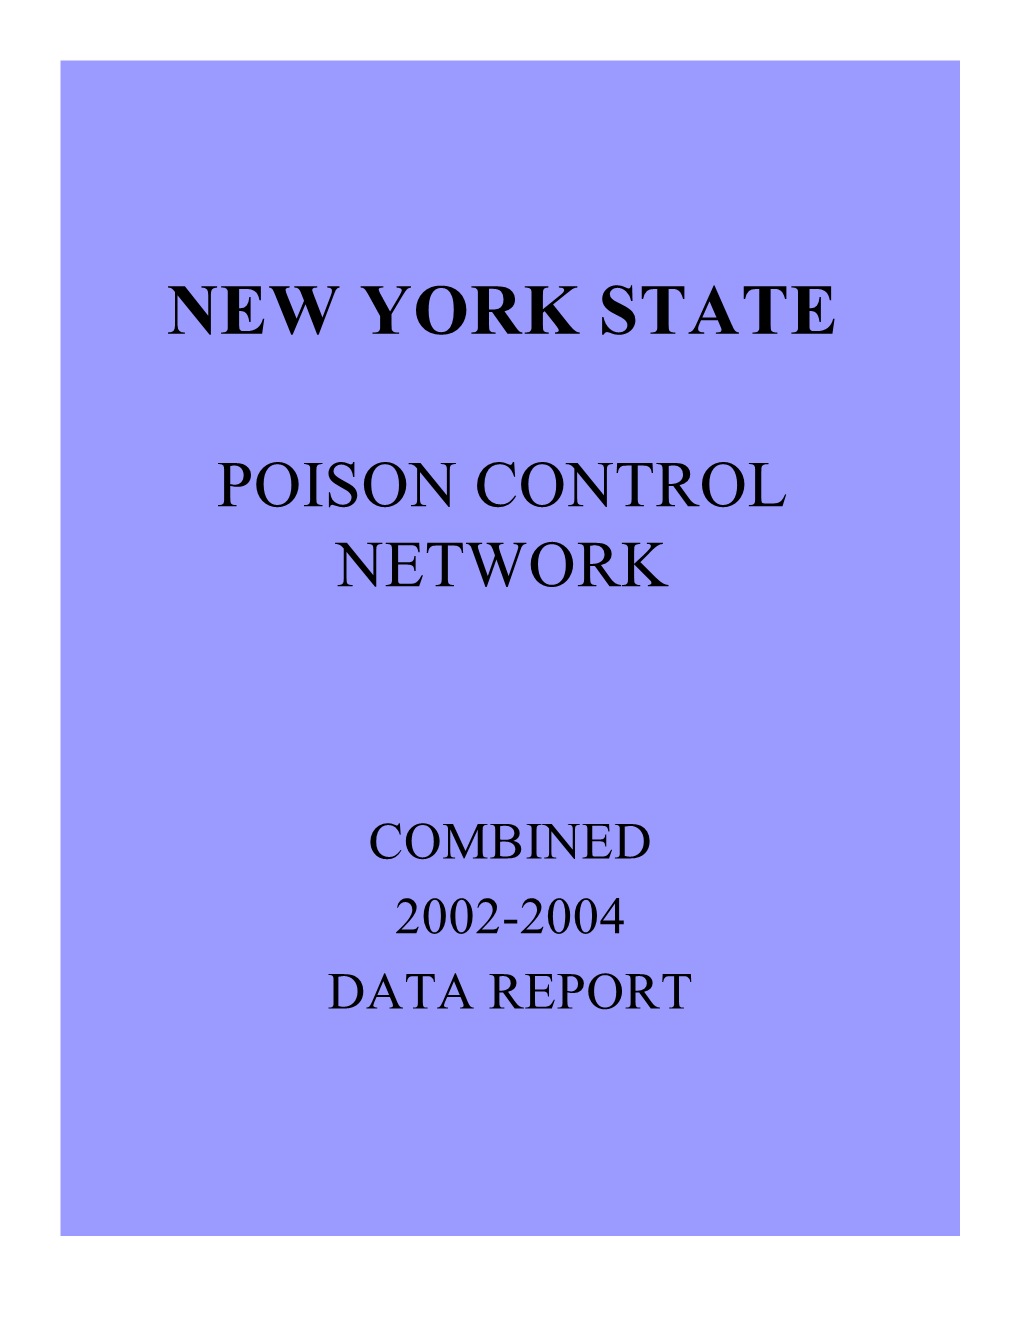 New York State Poison Control Network 2002-2004 Report Is